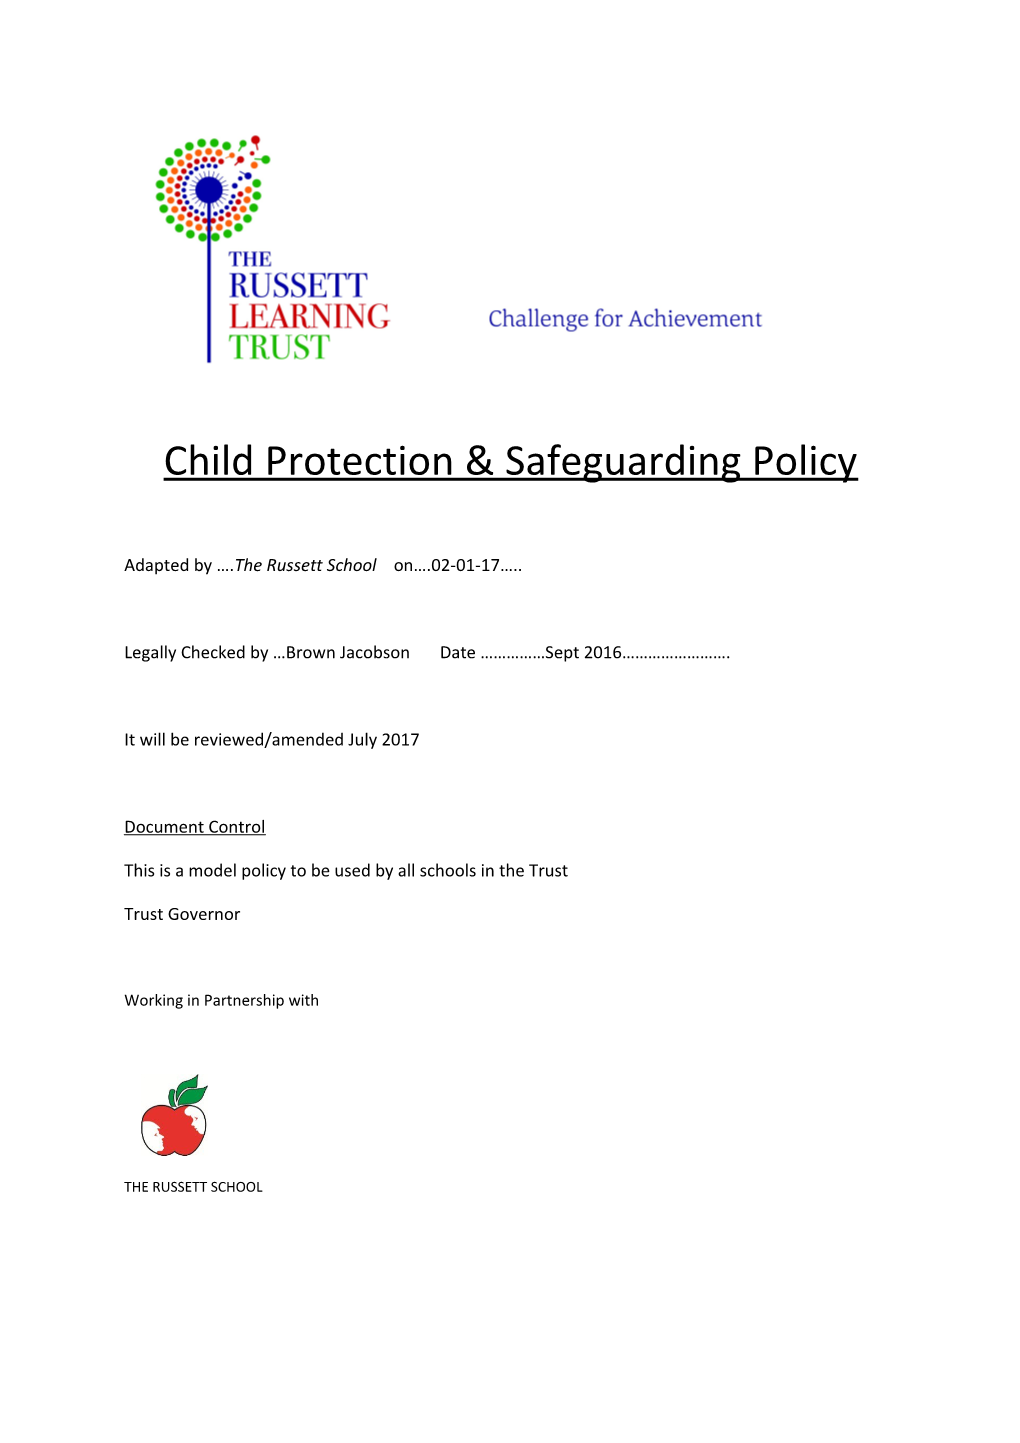 Child Protection & Safeguarding Policy